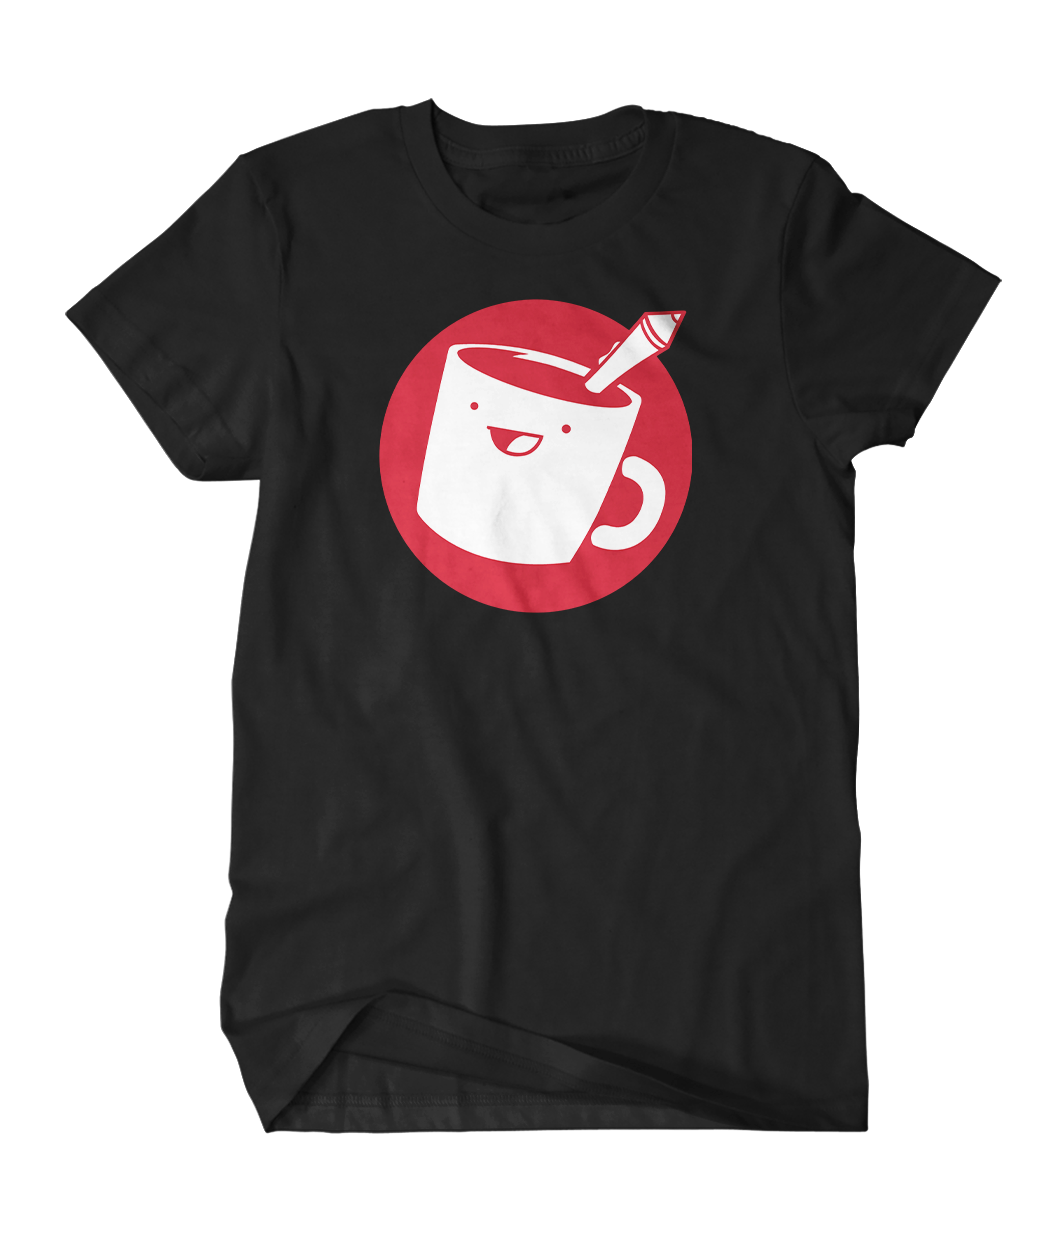 A black t-shirt with the red and white Drawfee logo of a mug with a pencil coming out of it. 